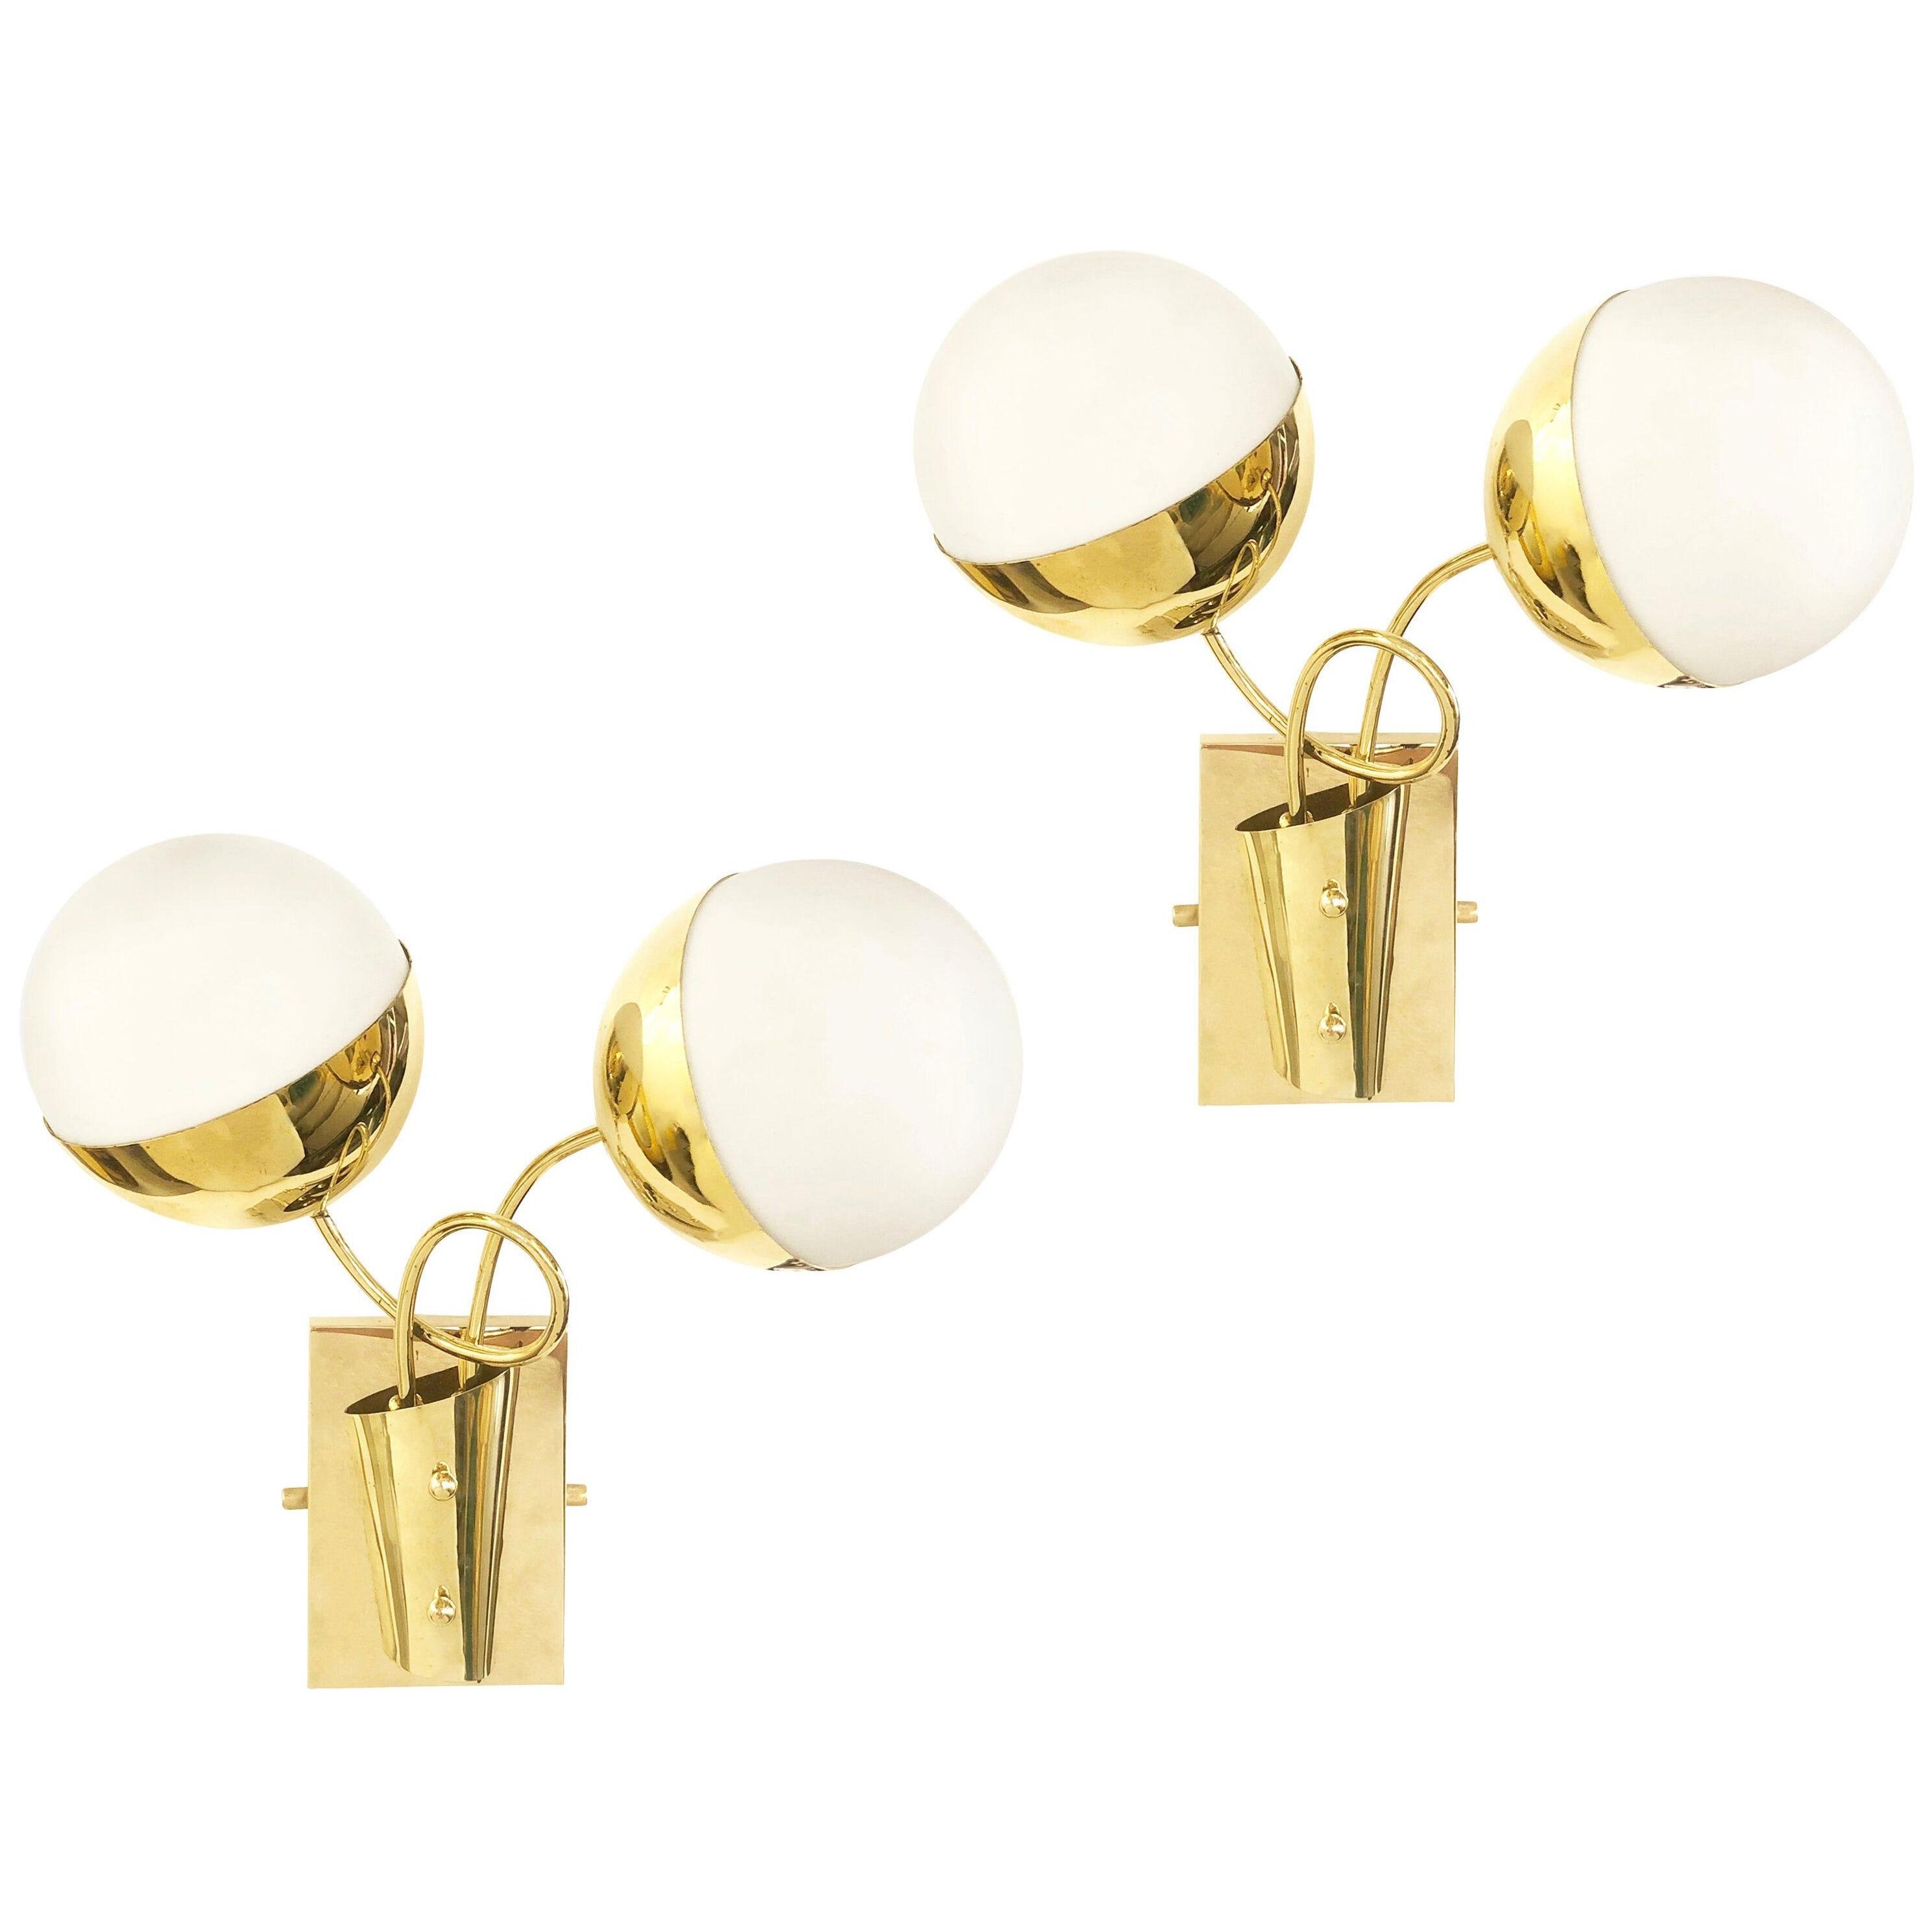 Midcentury Wall Lights with Two Globes